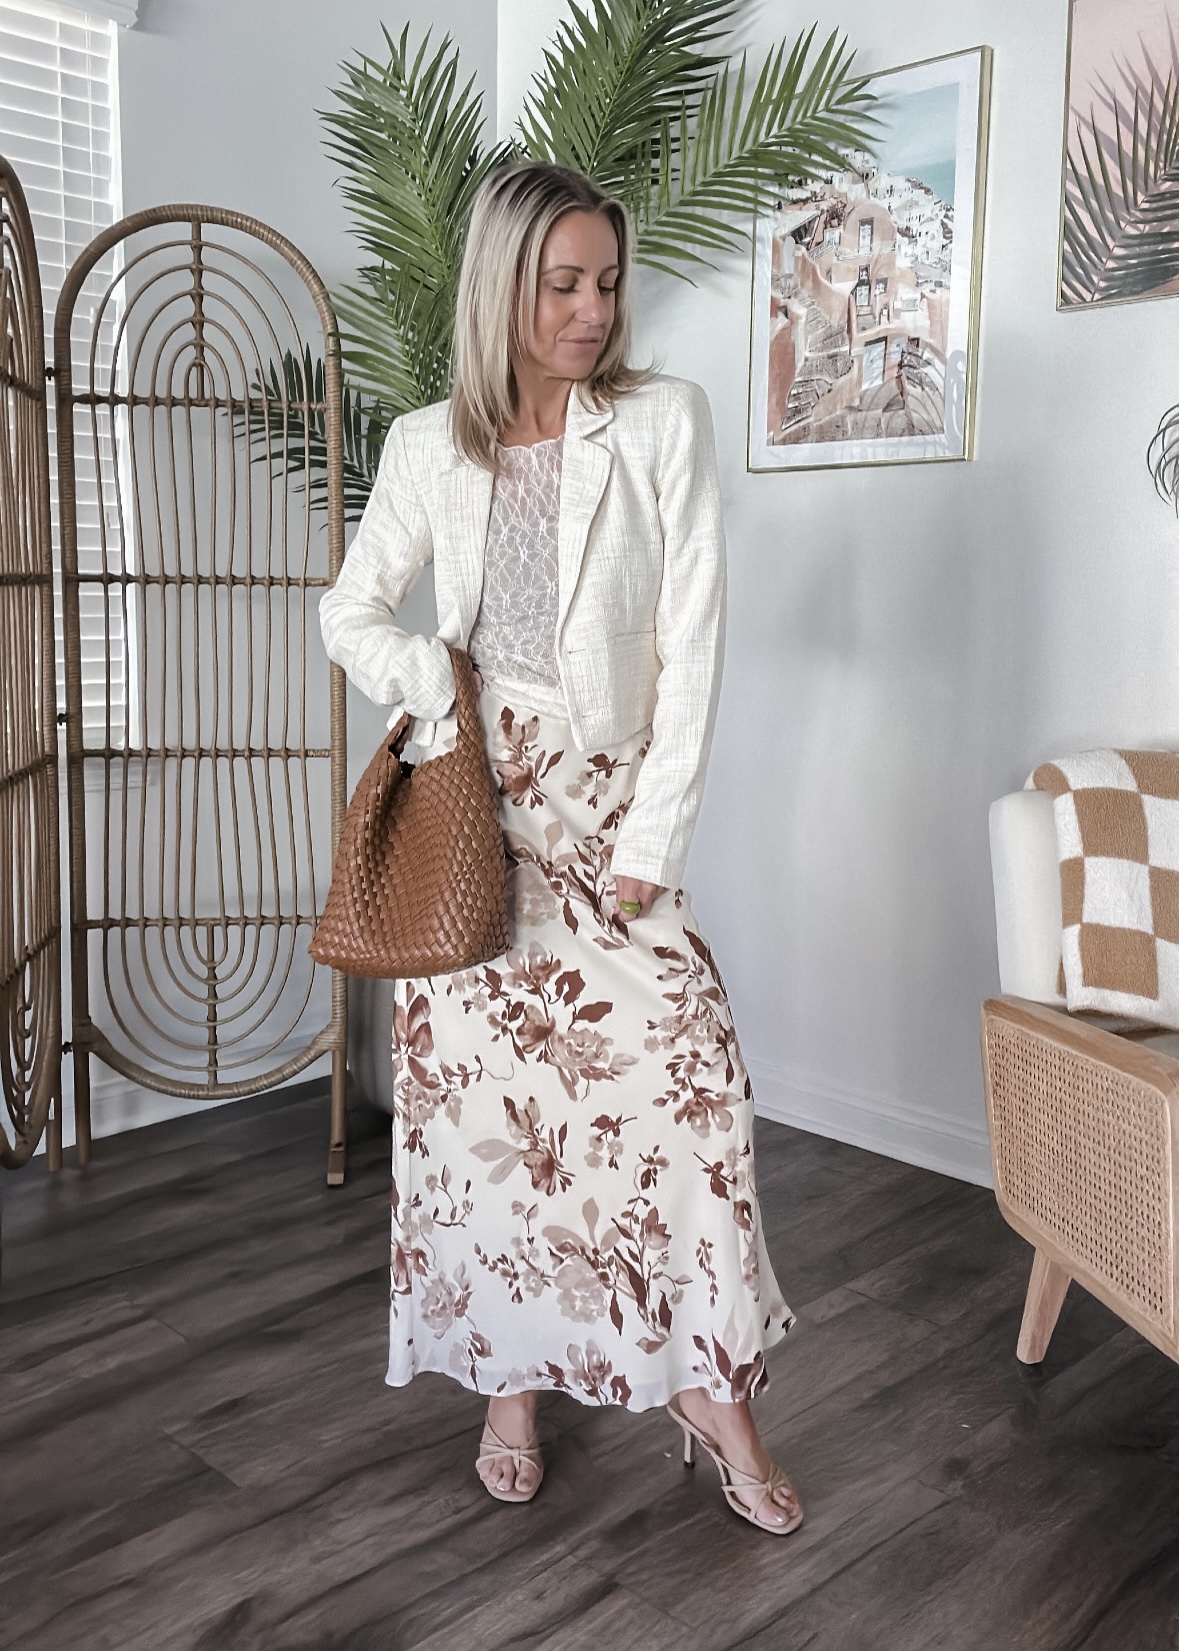 Styling New Spring Trends-Jaclyn De Leon style. New trends that I am loving this spring include sheer tops, maxi skirts, cargo, baggy jeans + bomber jackets. Here is a few looks I put together with fresh new style trends for Spring.